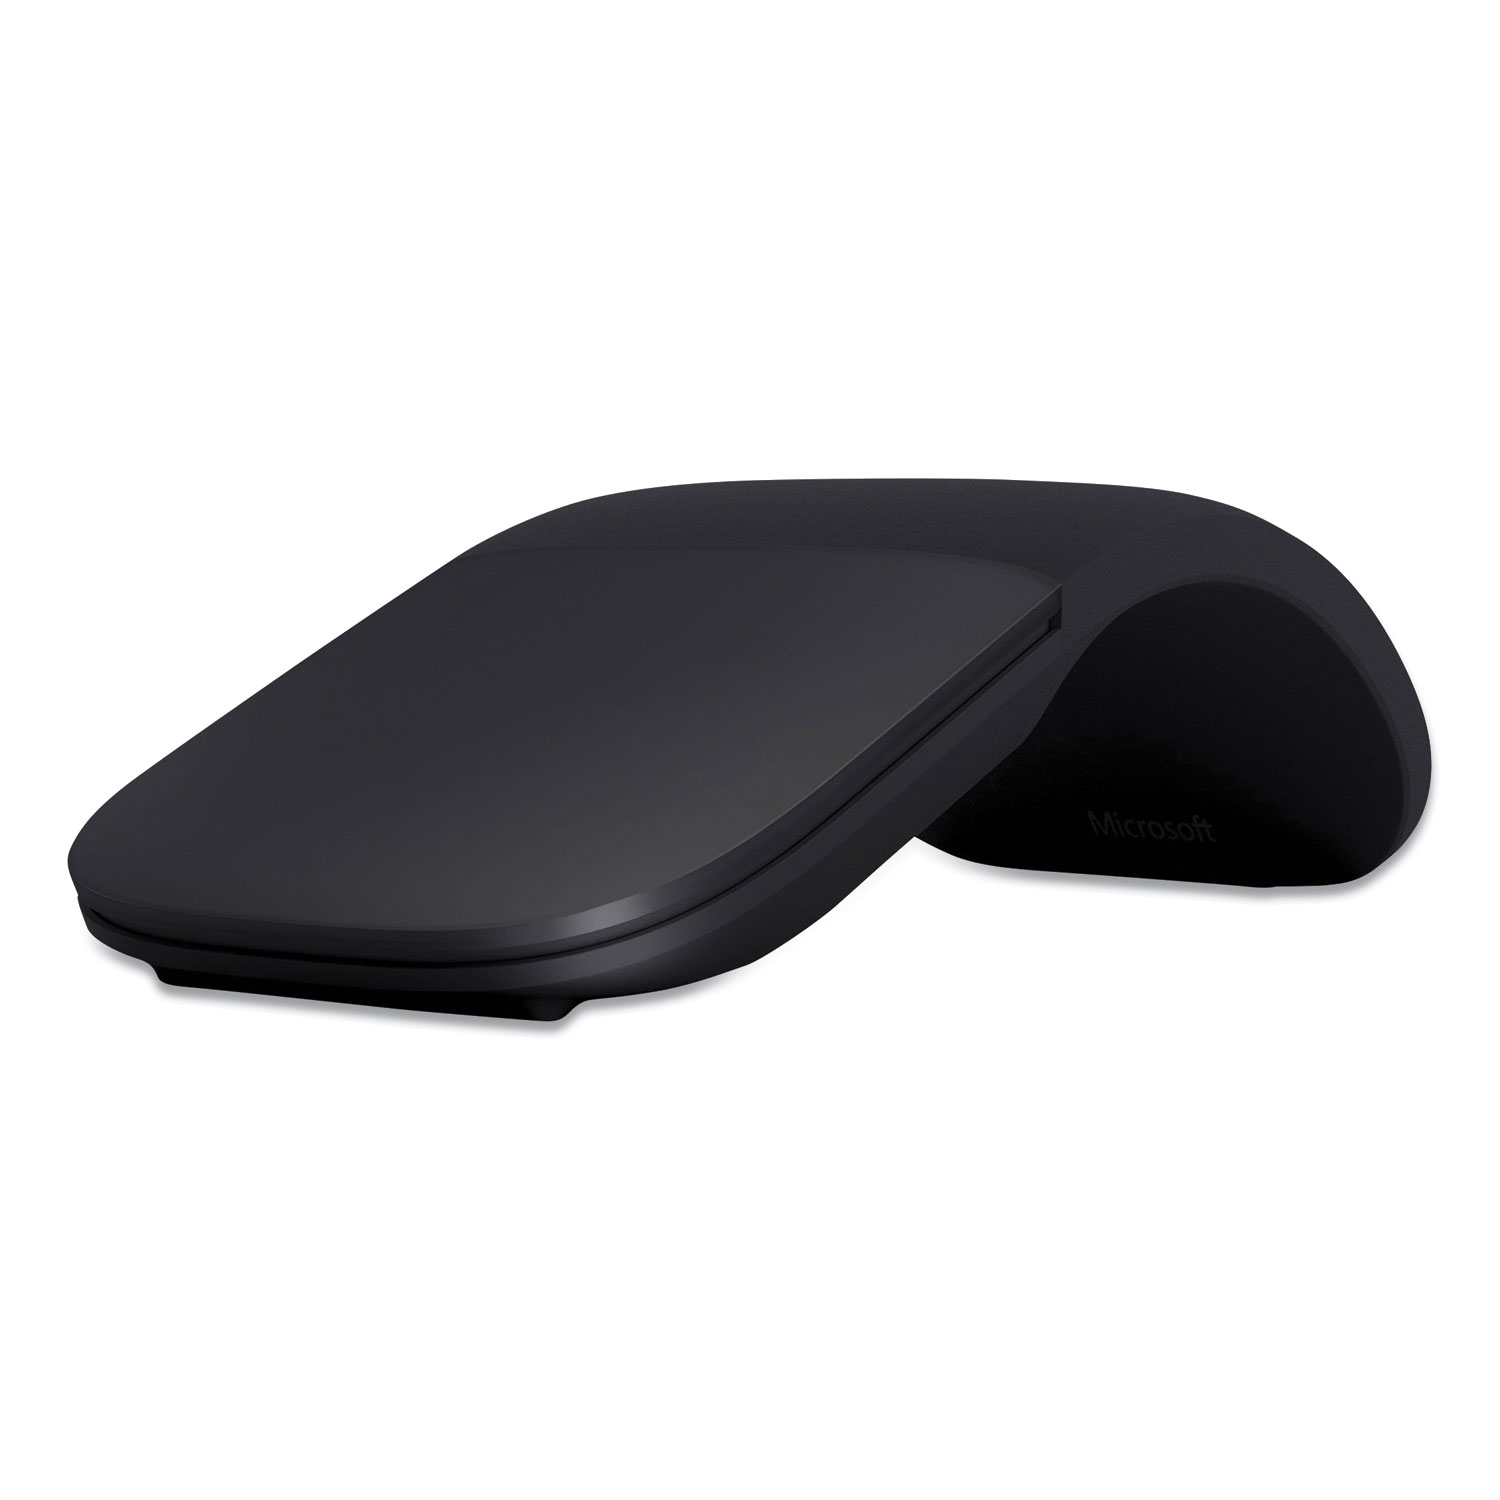  Microsoft ELG-00001 Arc Wireless Bluetooth Mouse, 32.8 ft Wireless Range, Left/Right Hand Use, Black (MSF2724482) 